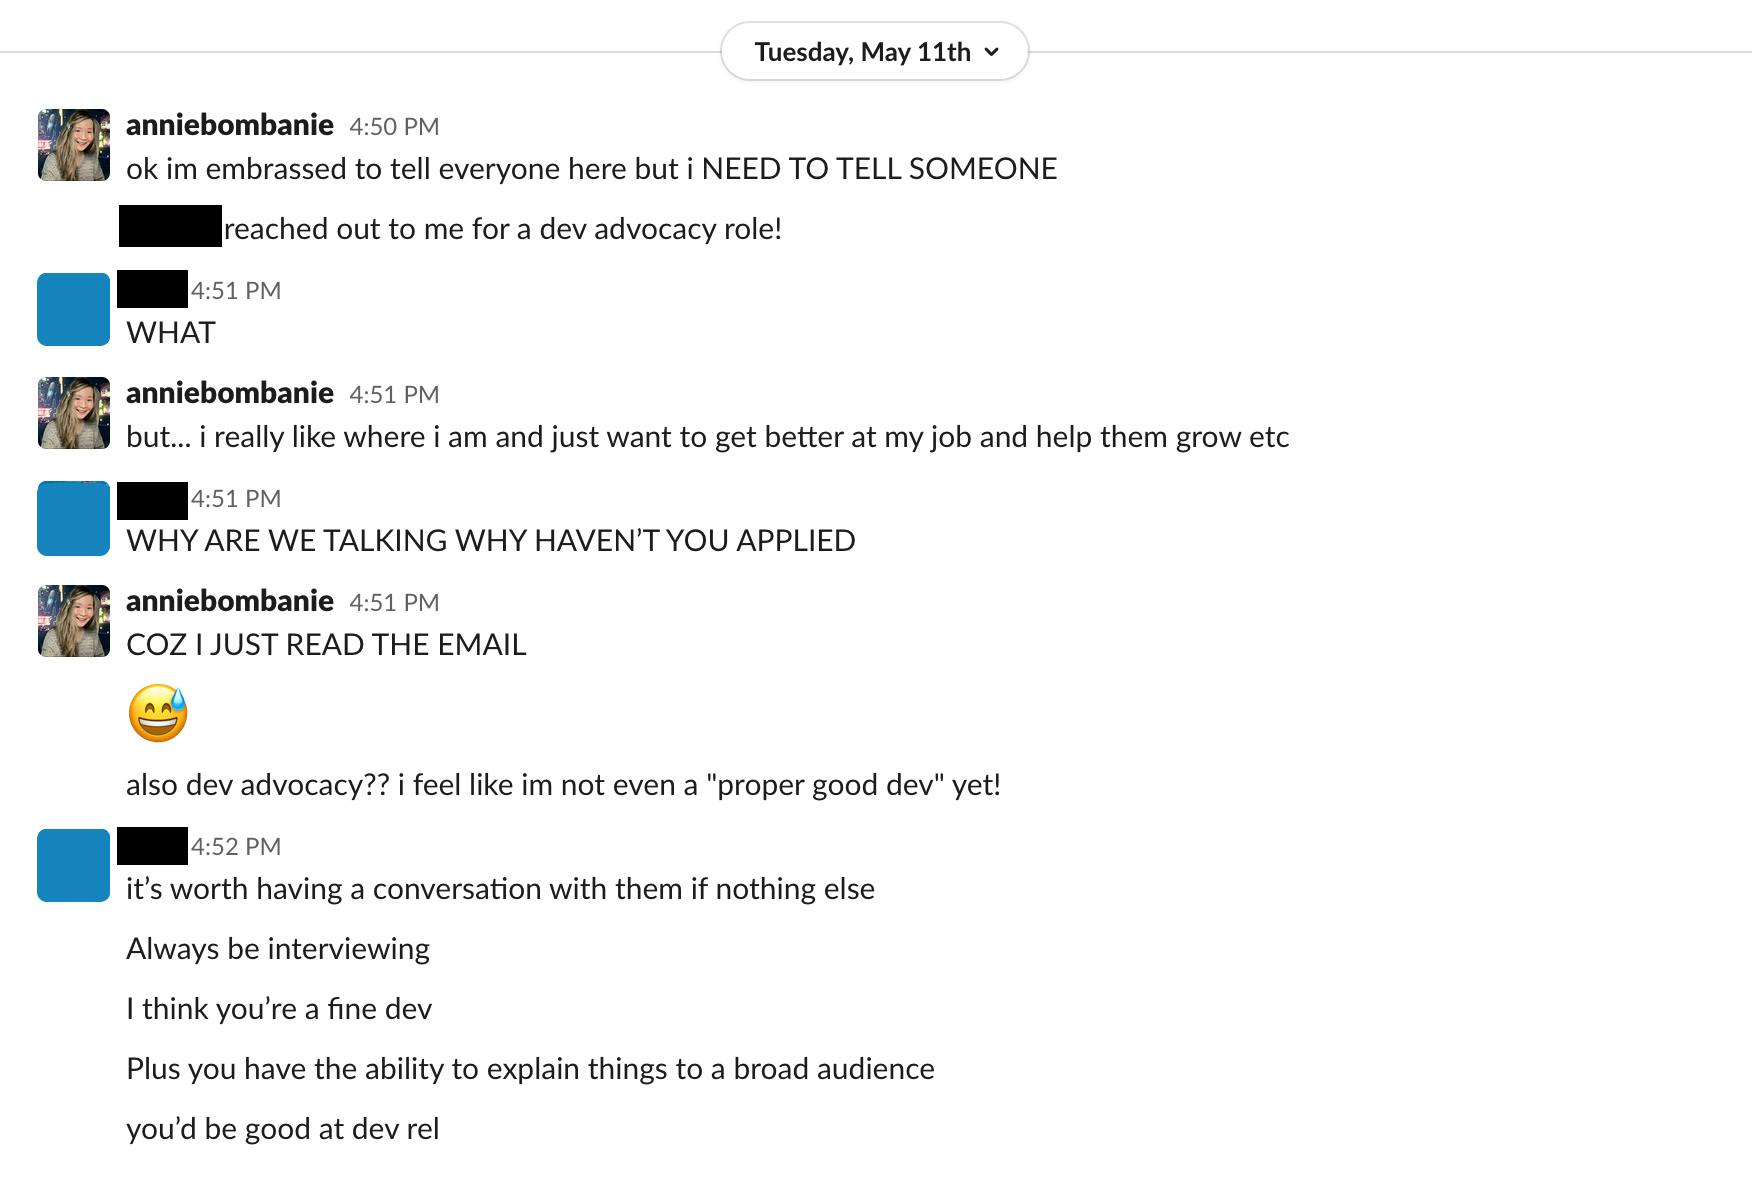 A Slack conversation on May 11th, 2021 between Annie and someone whose name is blacked out. Gist of the conversation is Annie likes her current job and isn't sure whether to interview, especially since she doesn't feel like a 'proper good dev', let alone a developer advocate. Her friend advised her to 'always be interviewing'.